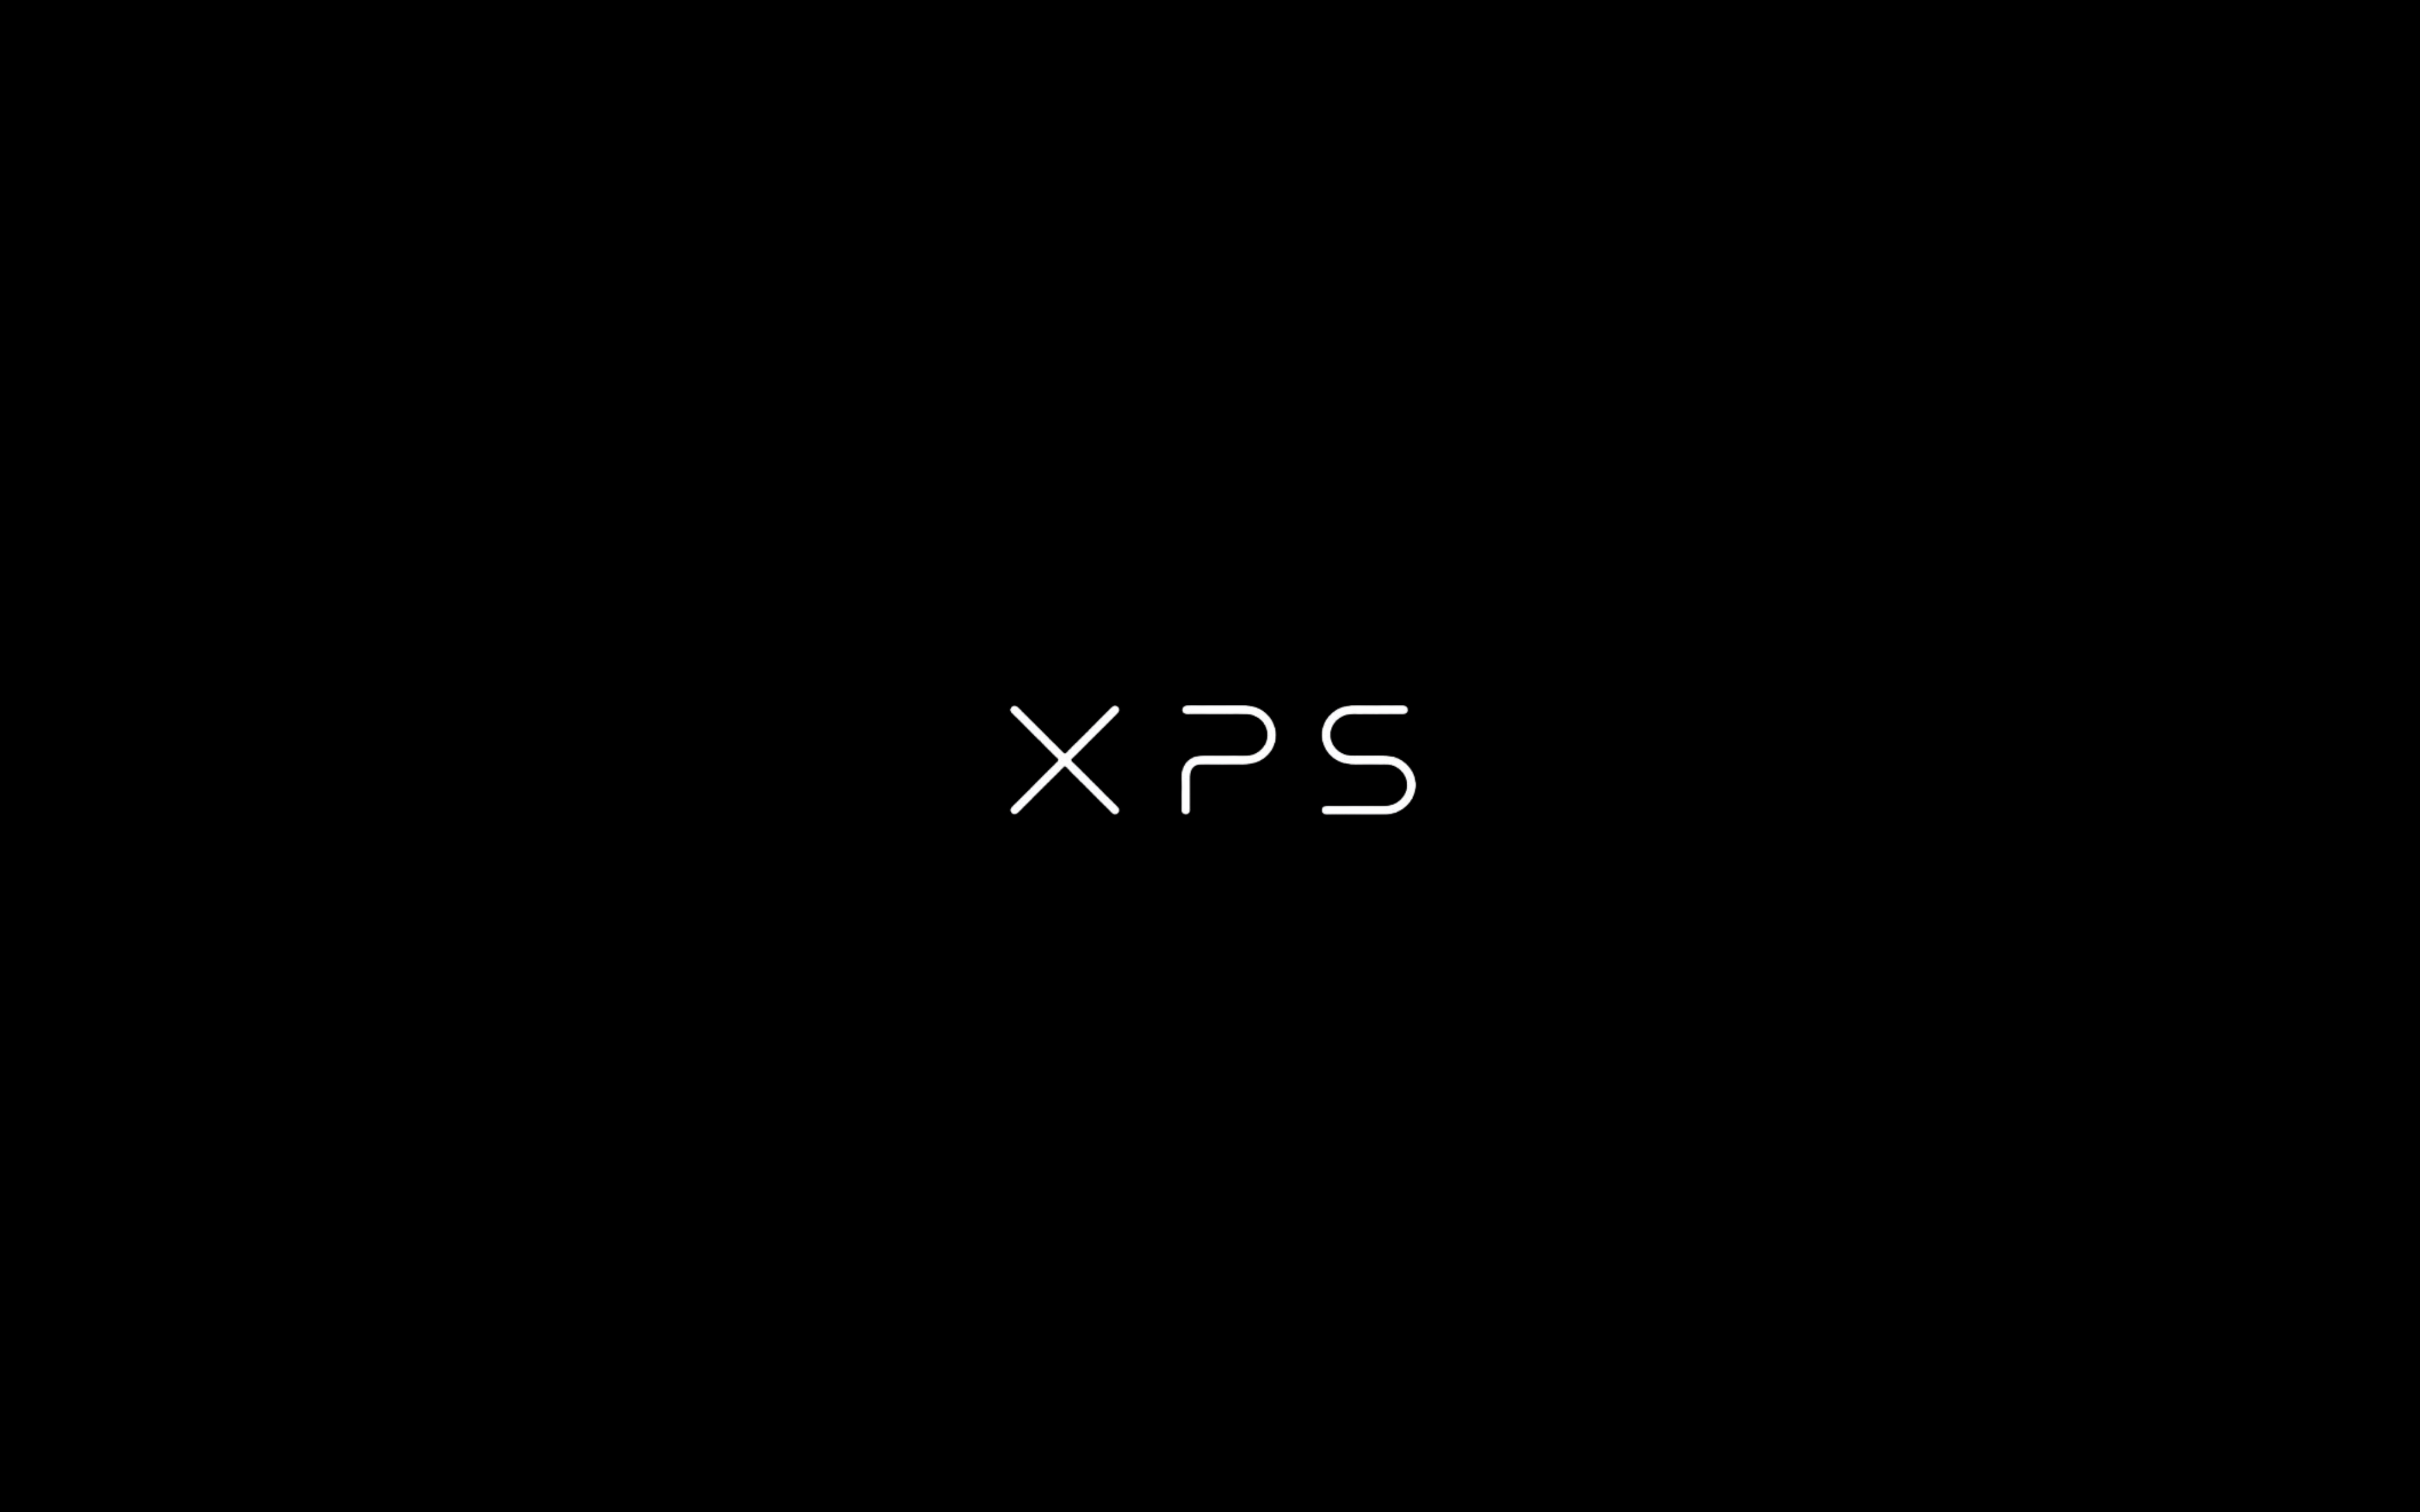 Dell Xps Logo Wallpapers